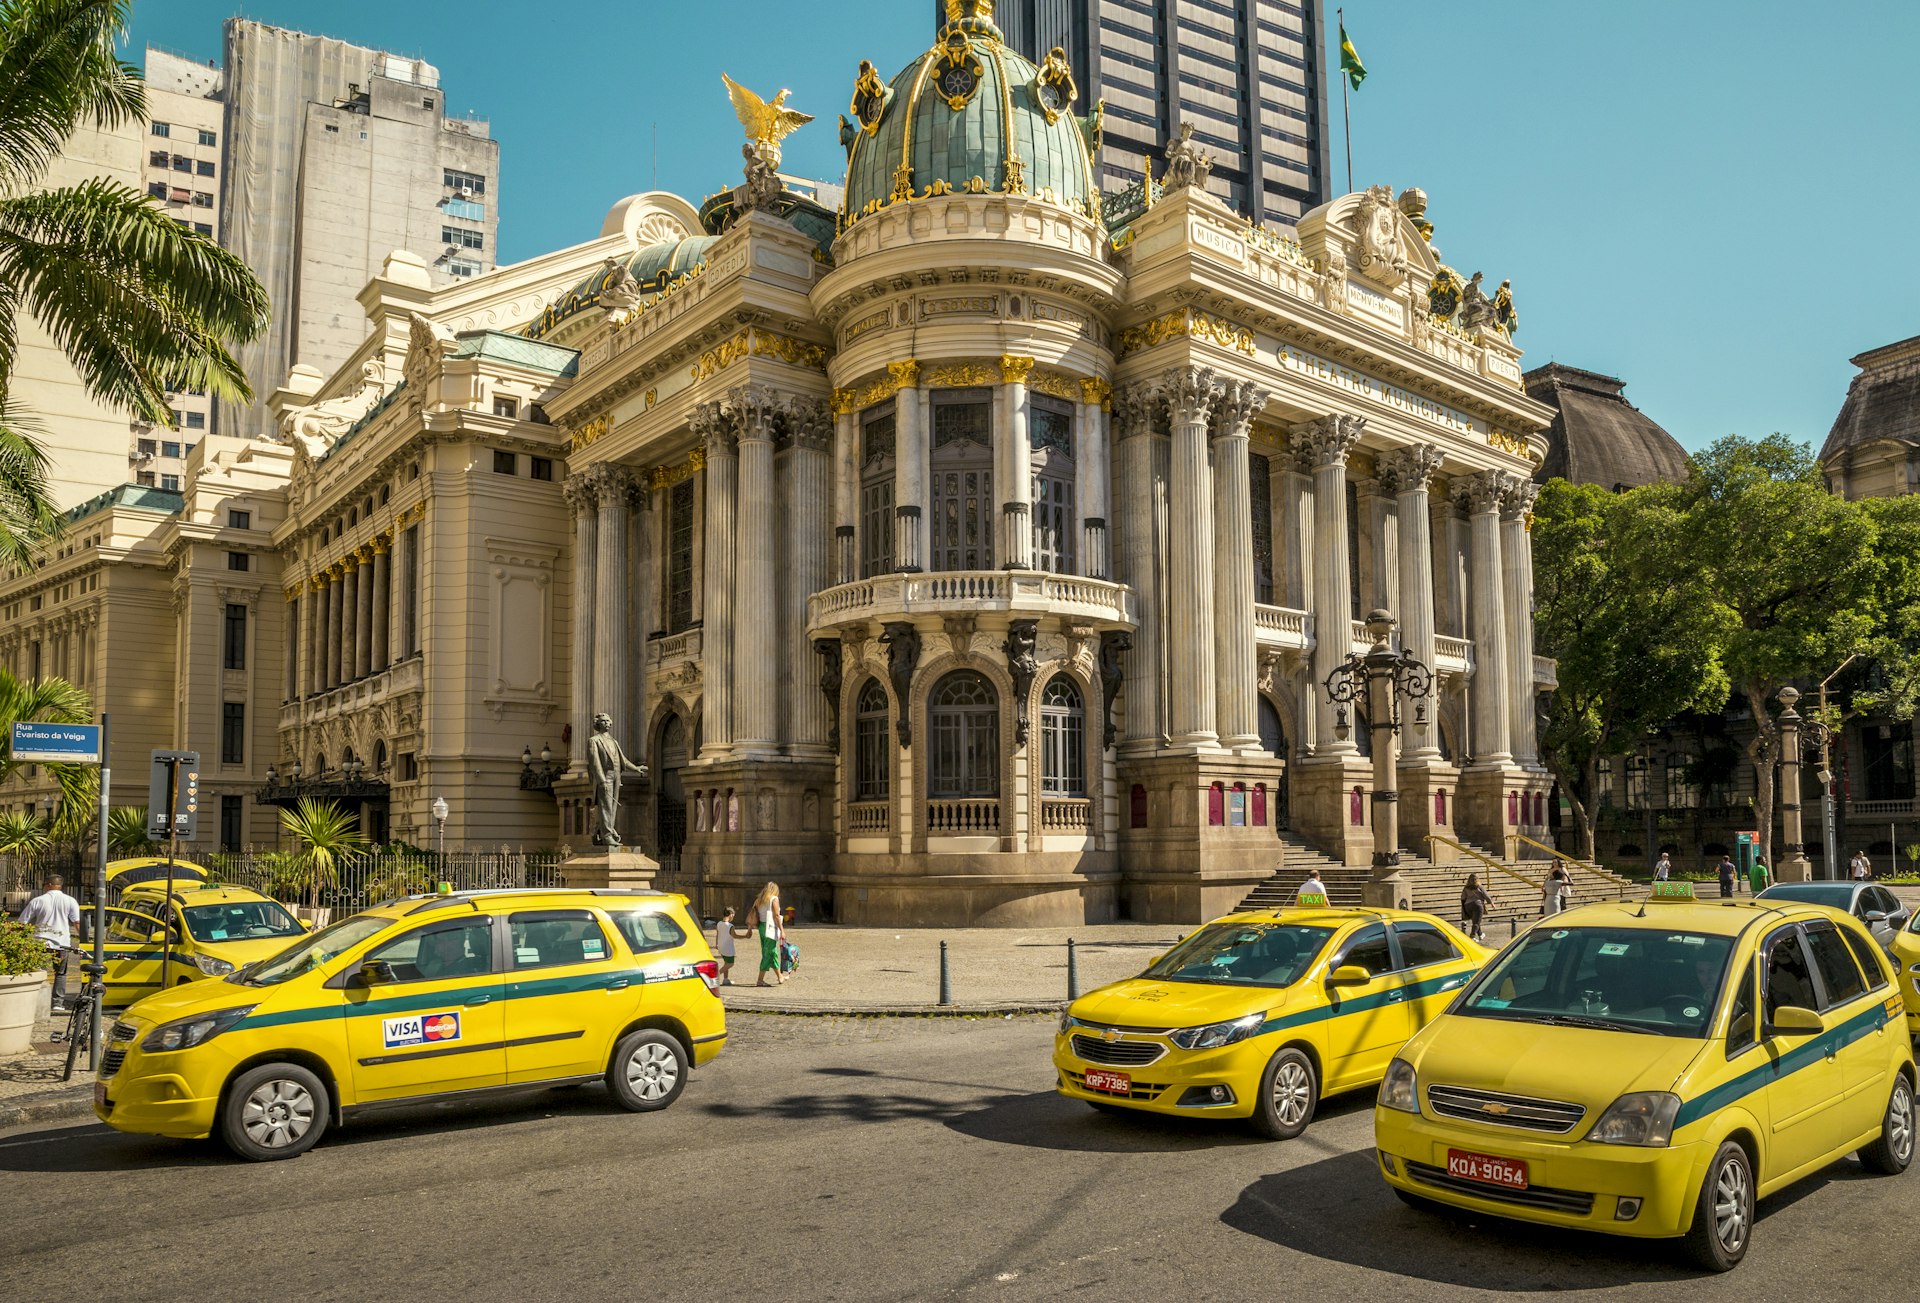 Street full of taxi cars with Theatro Municipal in the background in Rio de Janeiro, Brazil